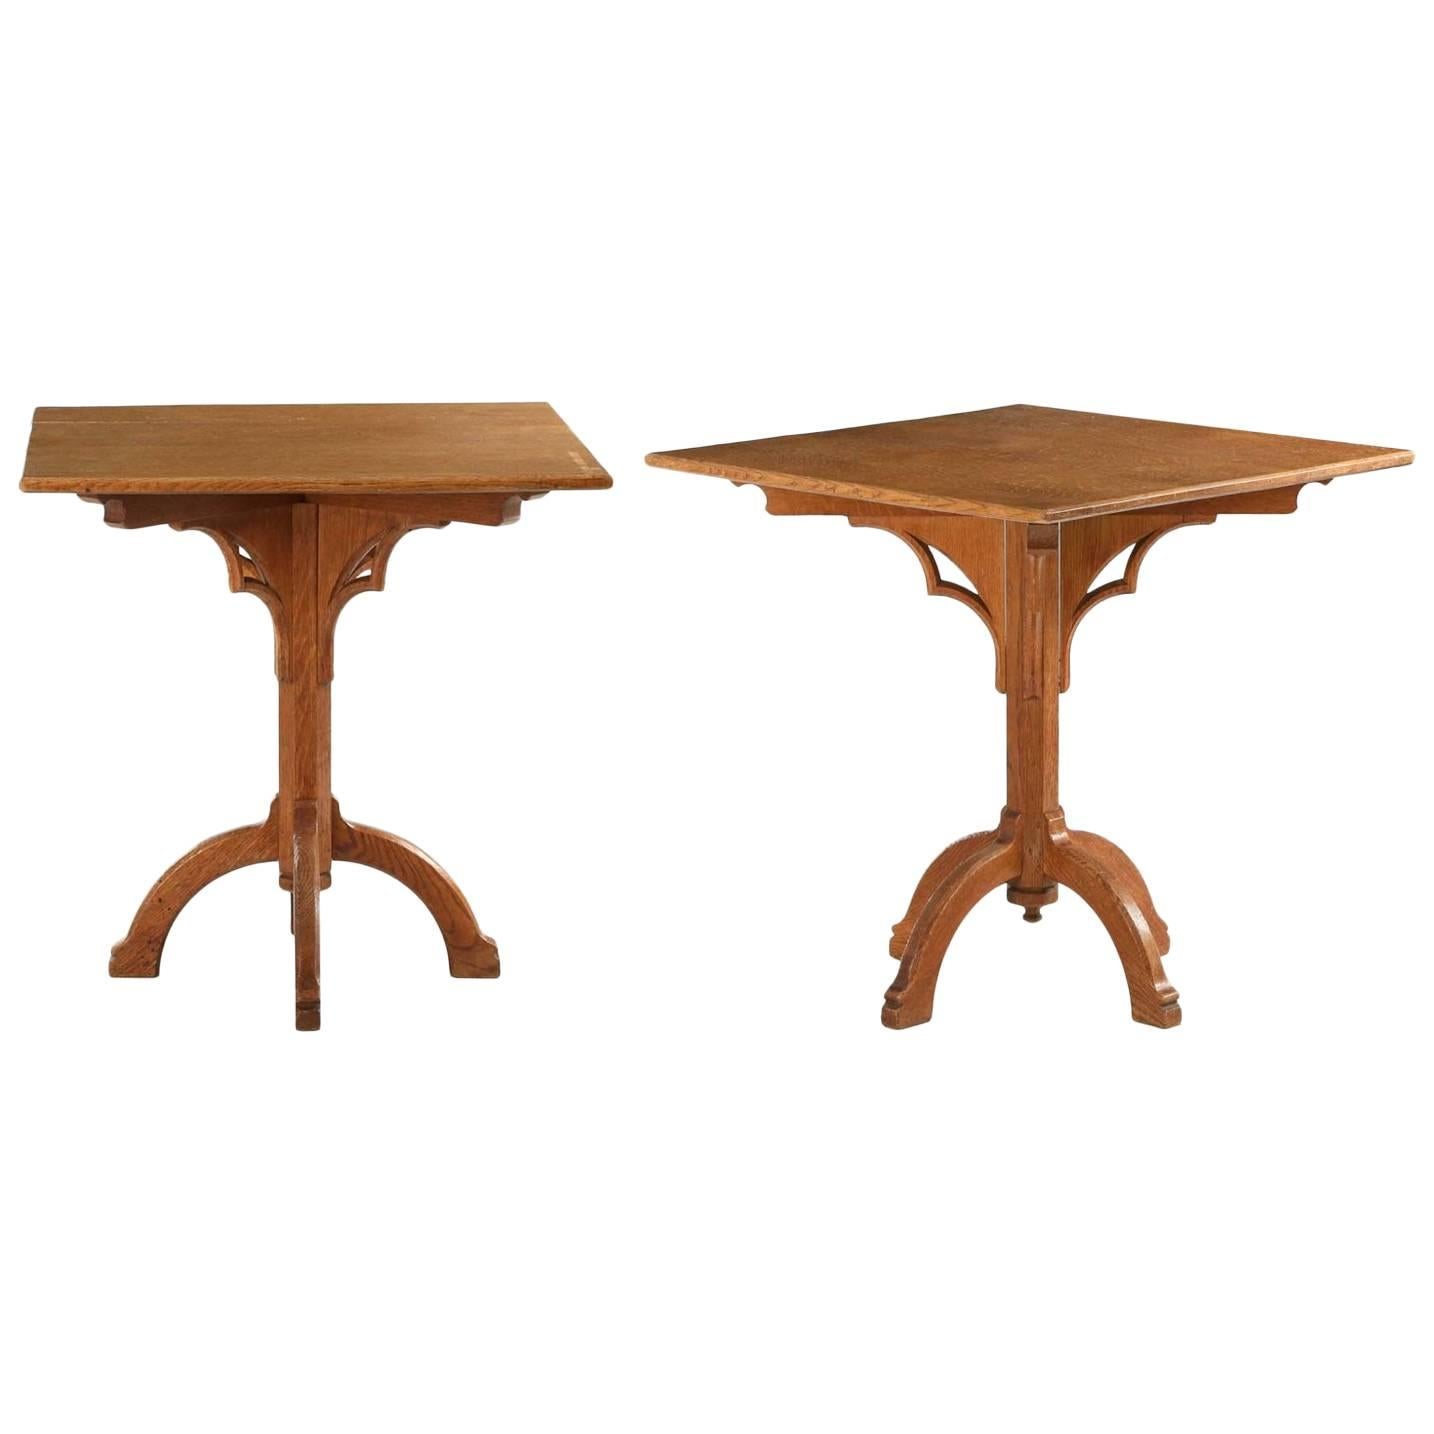 Pair of Arts & Crafts Oak Antique Side Tables in Gothic Taste